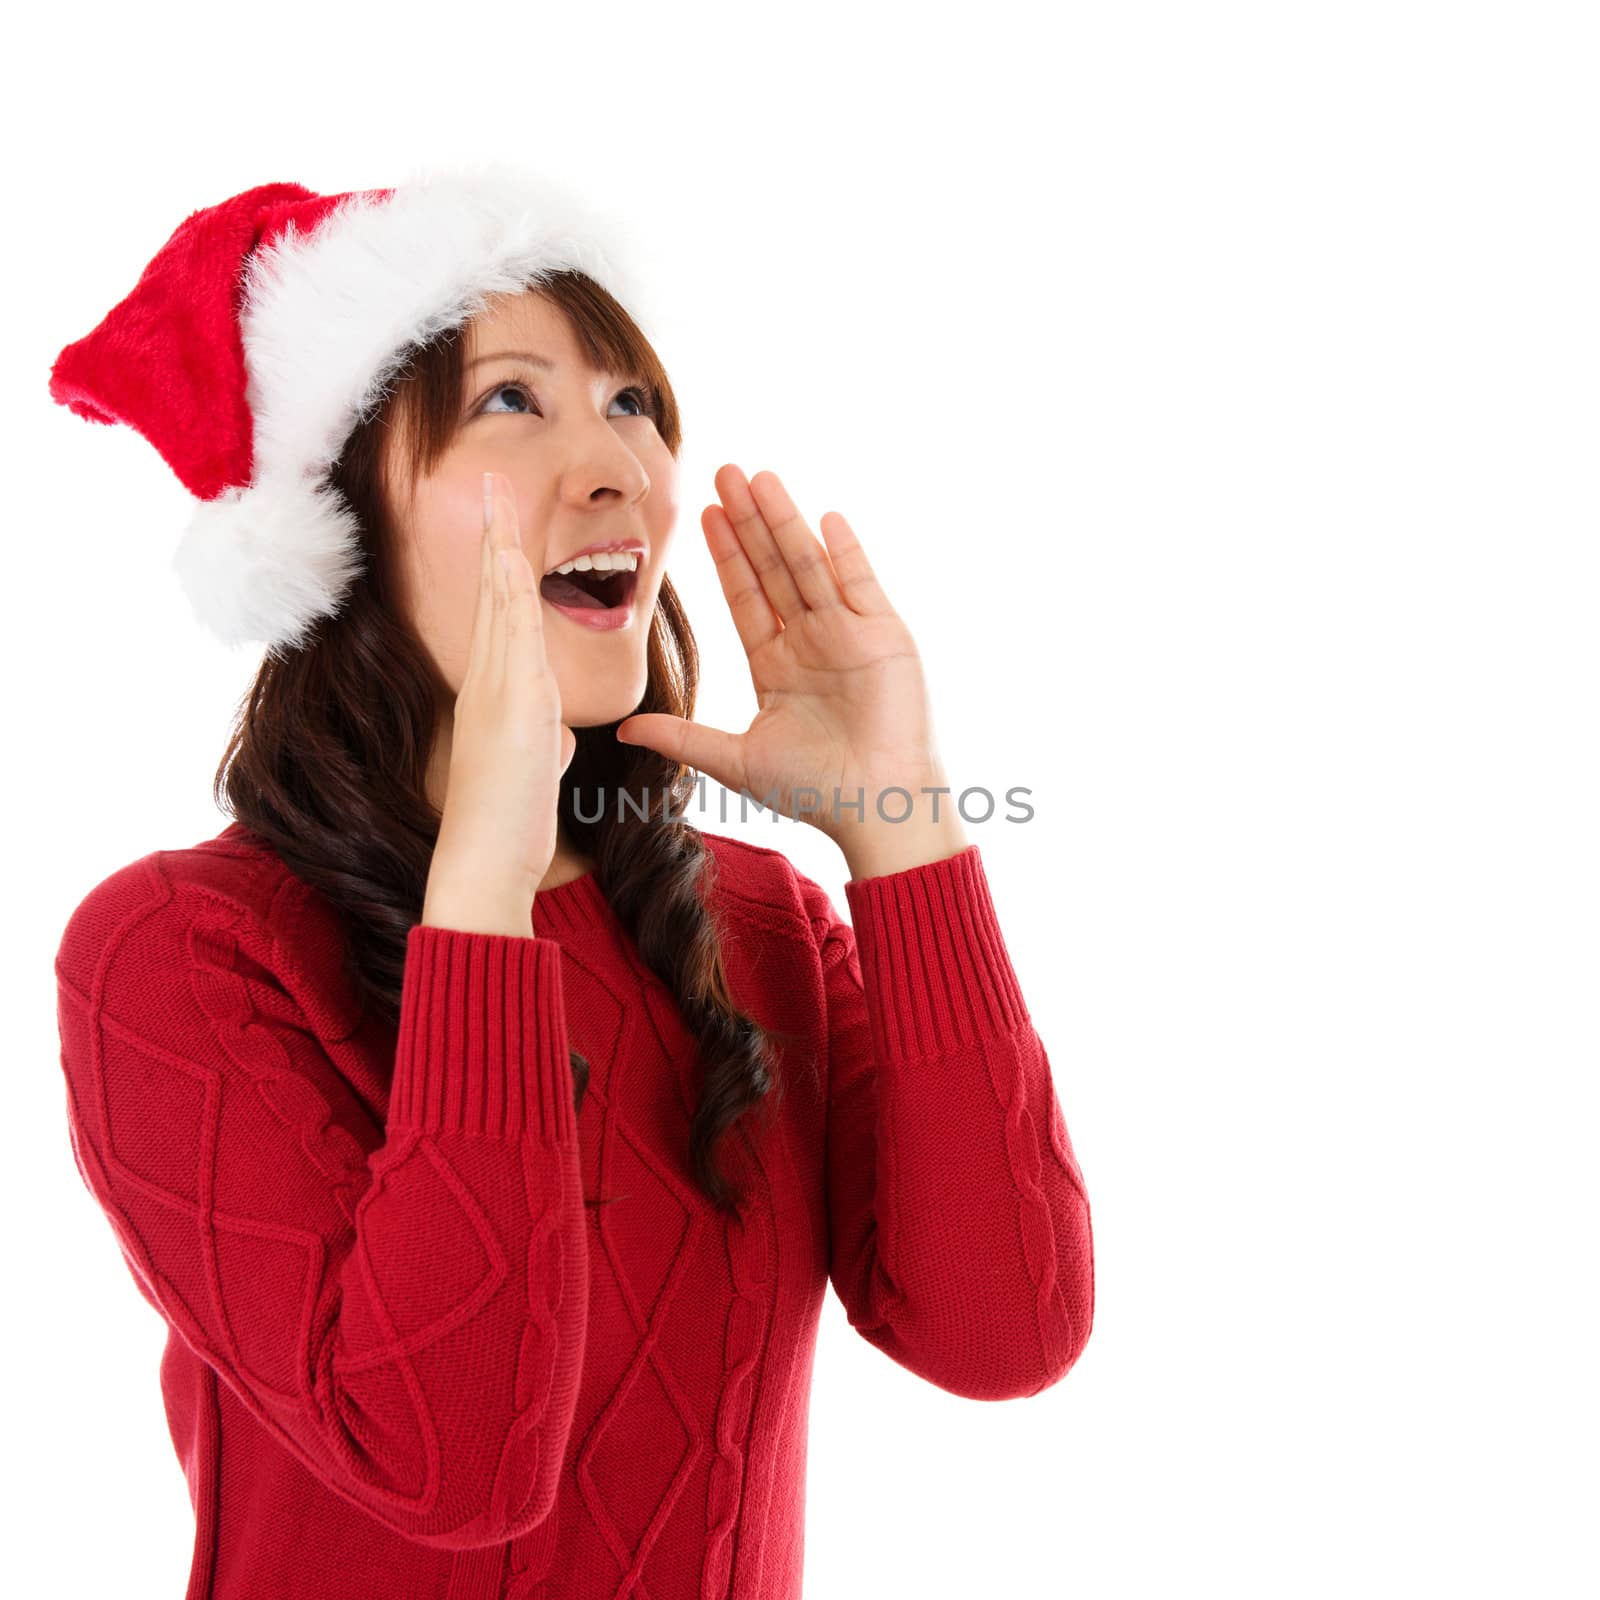 Happy Christmas woman shouting excited isolated on white background wearing red Santa hat. Beautiful Asian model.